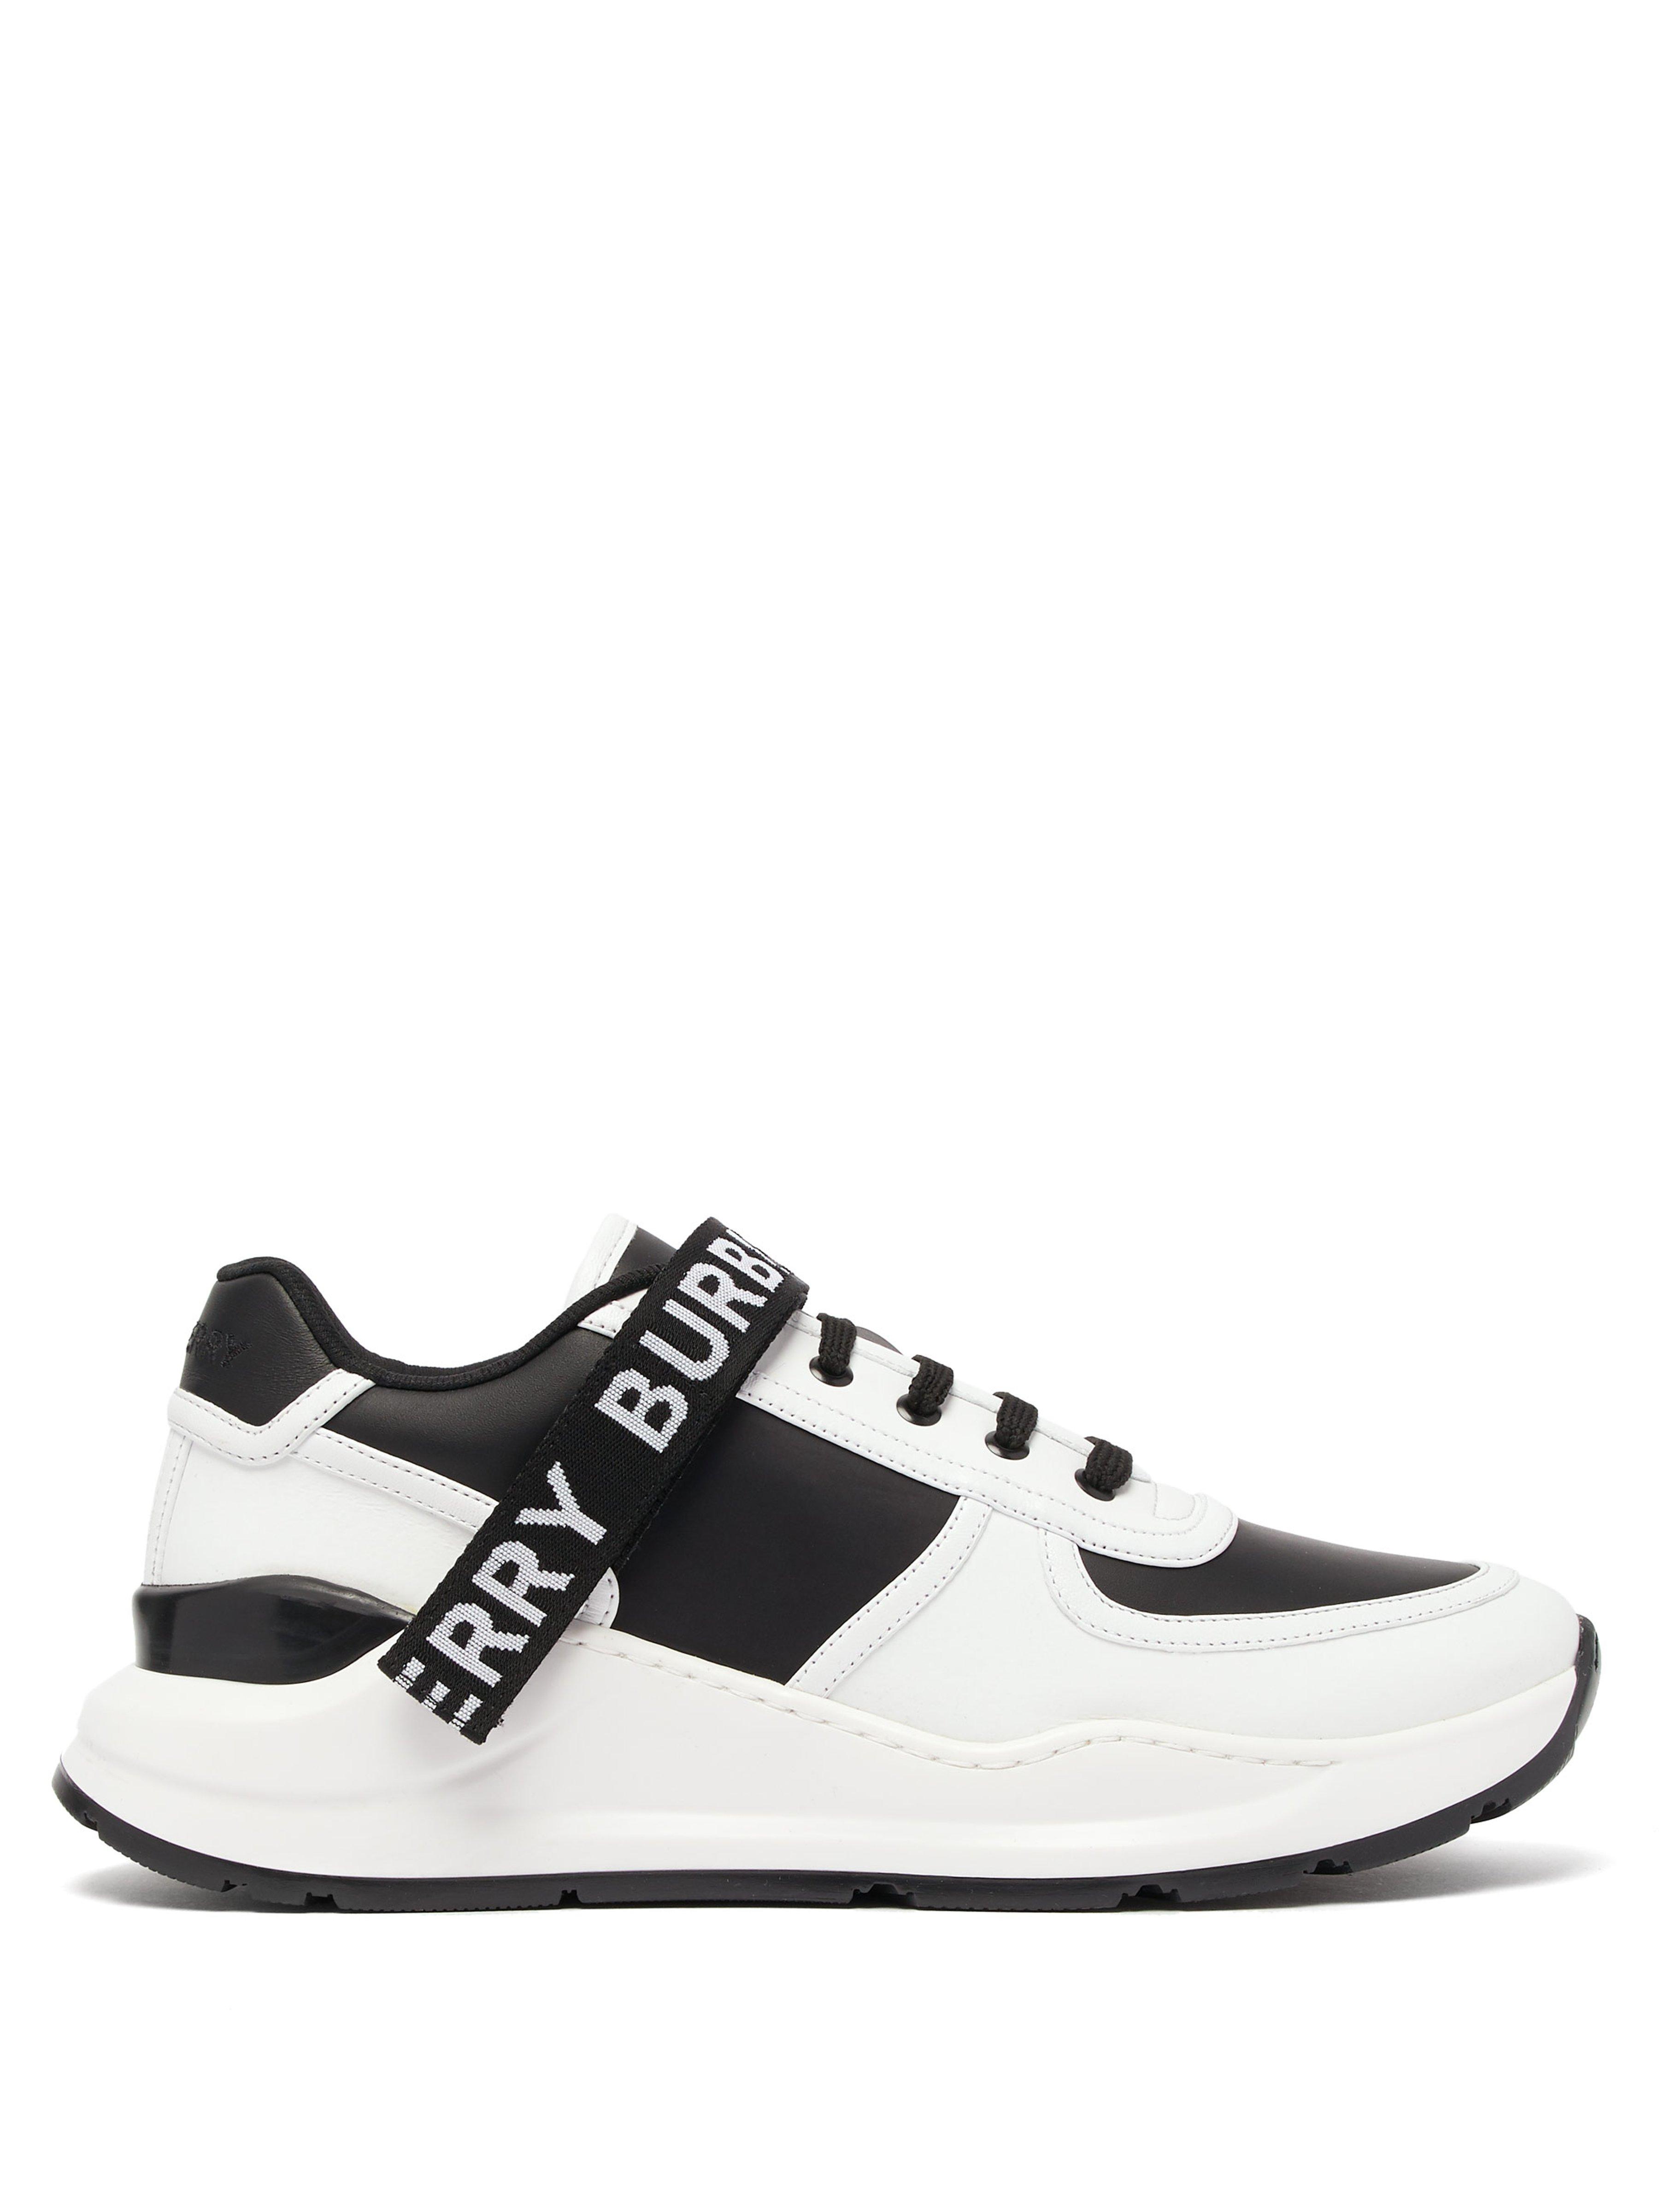 burberry black trainers